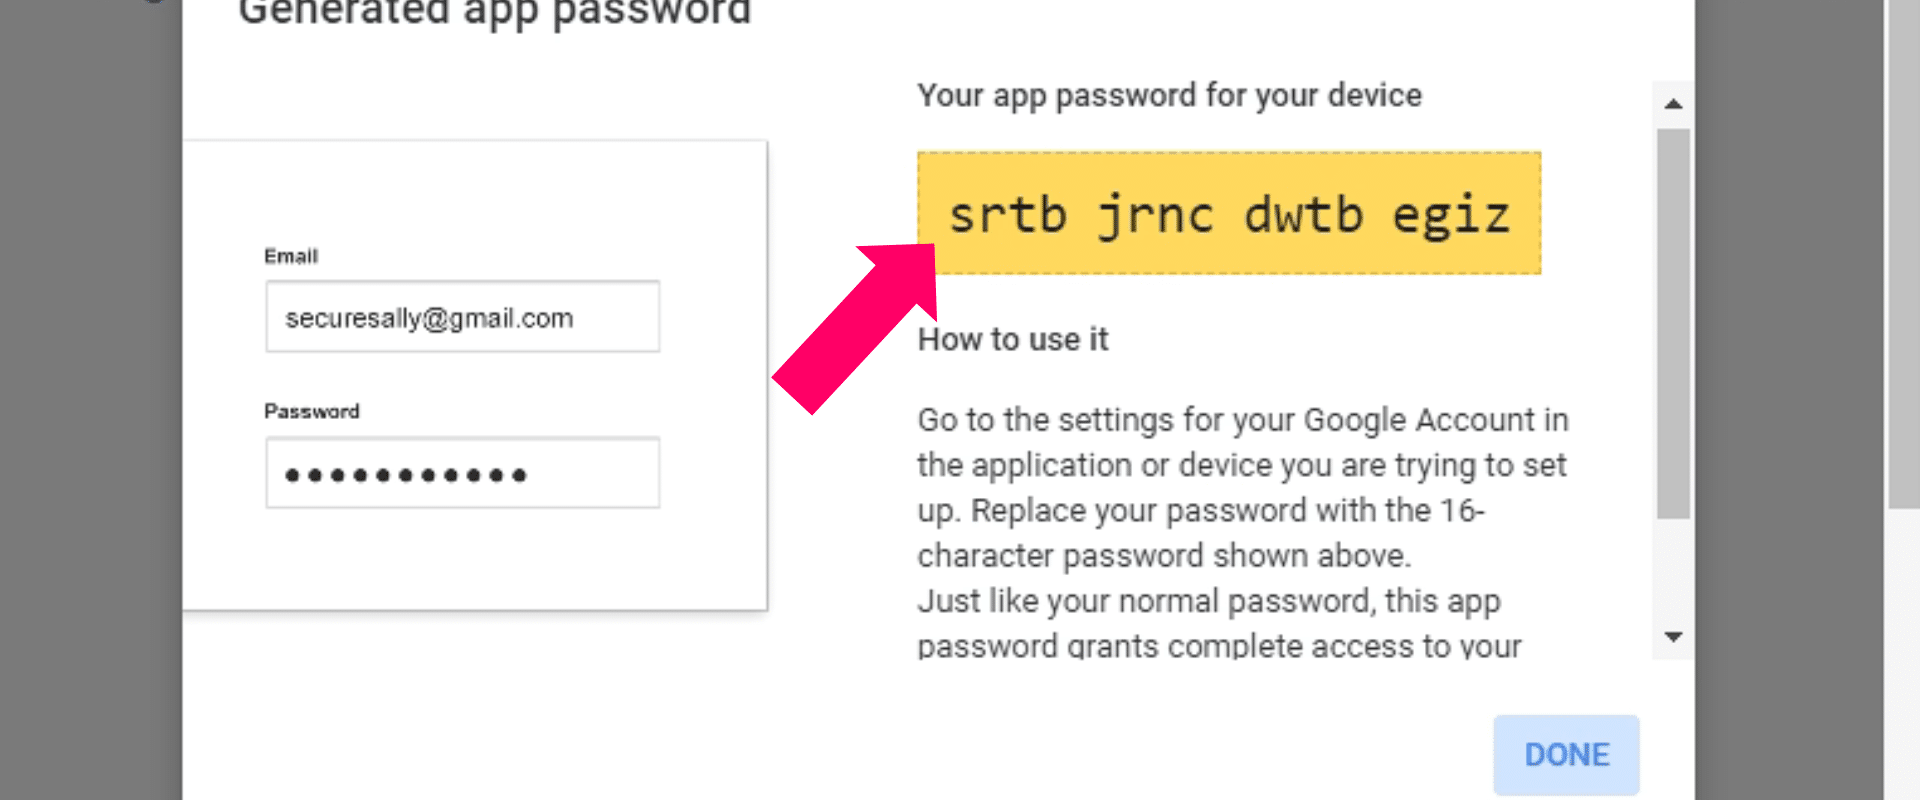 Generate New Password: Select 'App' and then 'Other', type 'Click Analytic', and click 'Generate'.